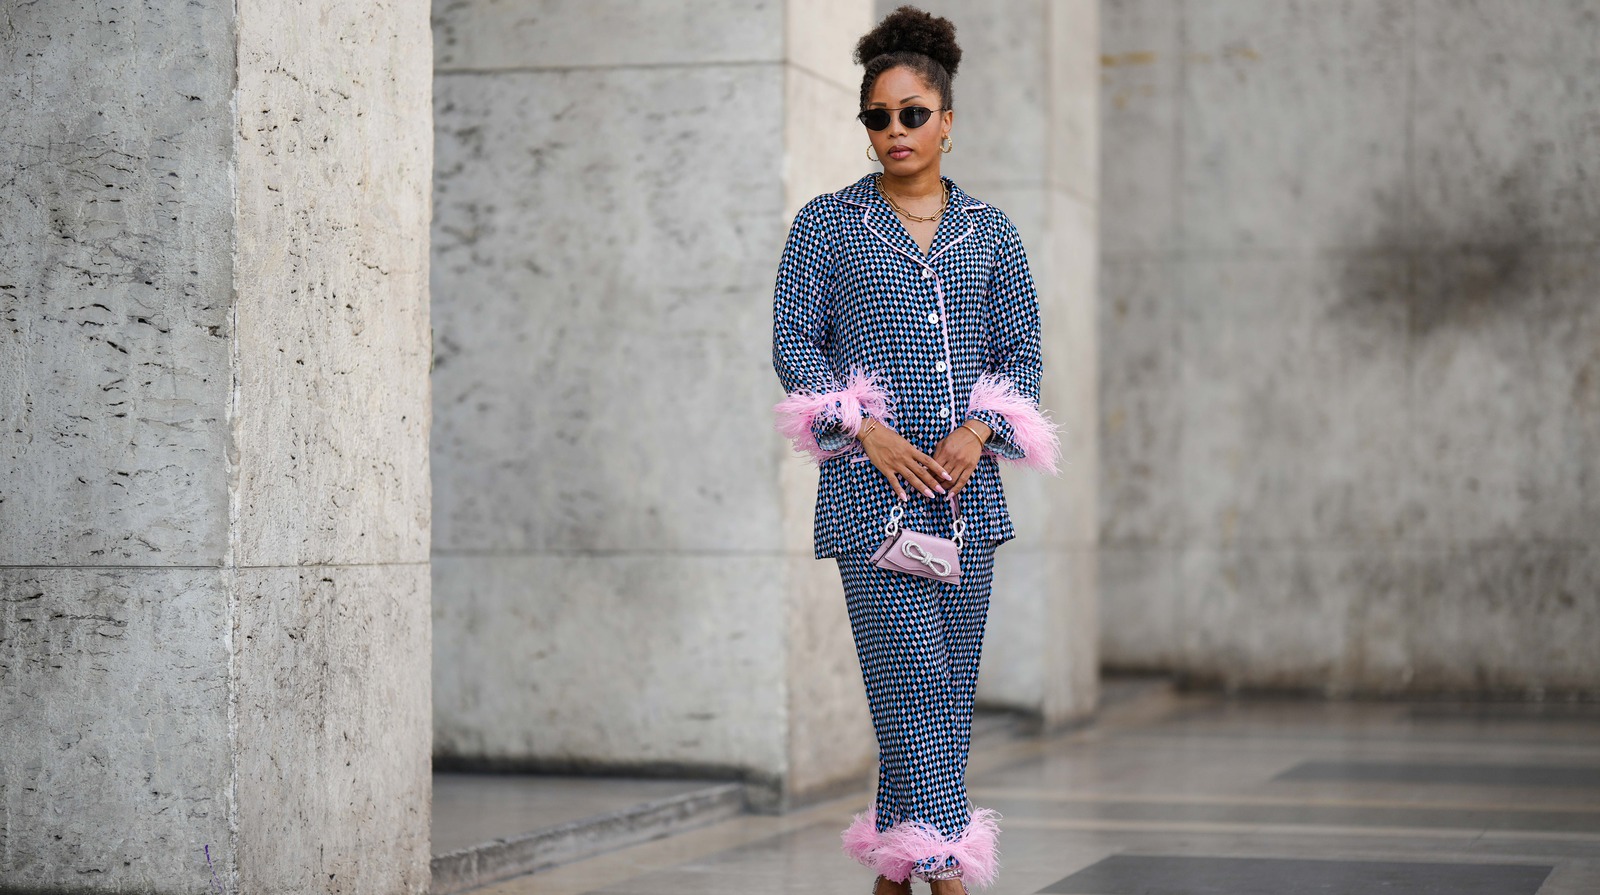 Is The Pajama Look A Good Fashion Trend?-Pajamas That Can Be Worn Out In  Public Rather Than In Bed.